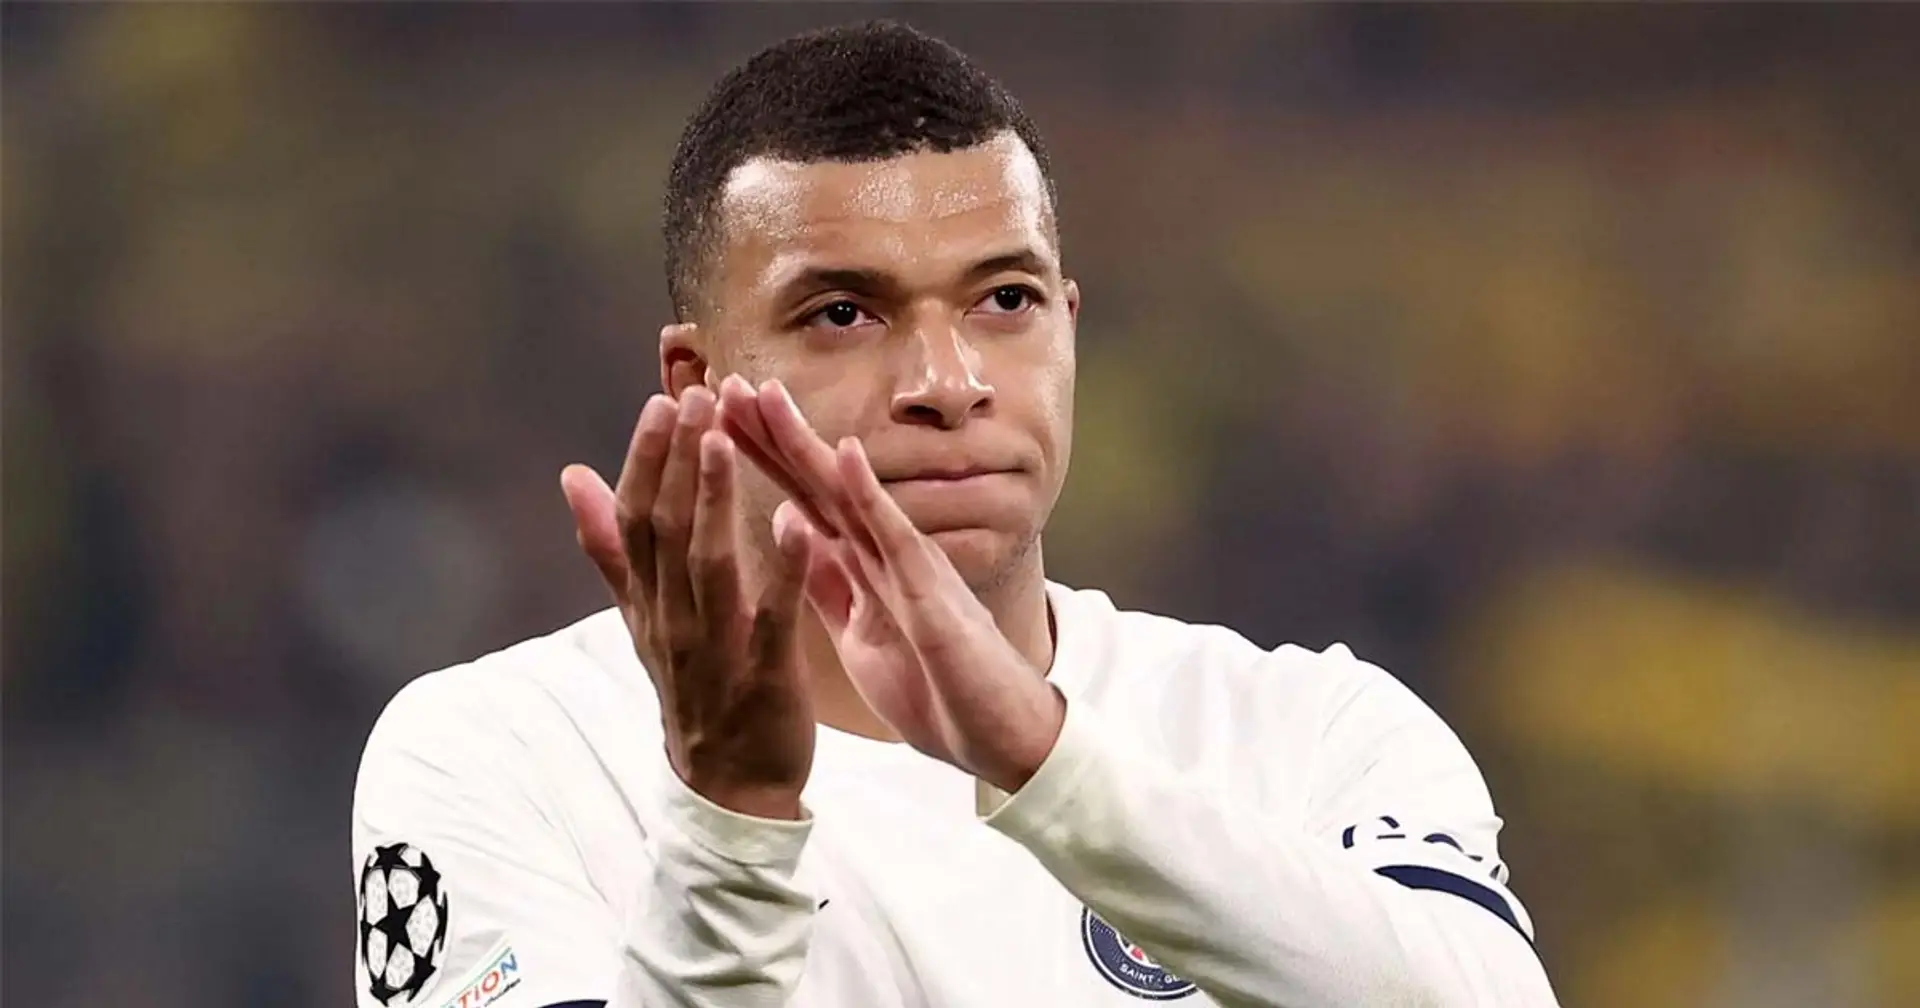 Mbappe 'explores' Liverpool move but Reds turn him down for one reason